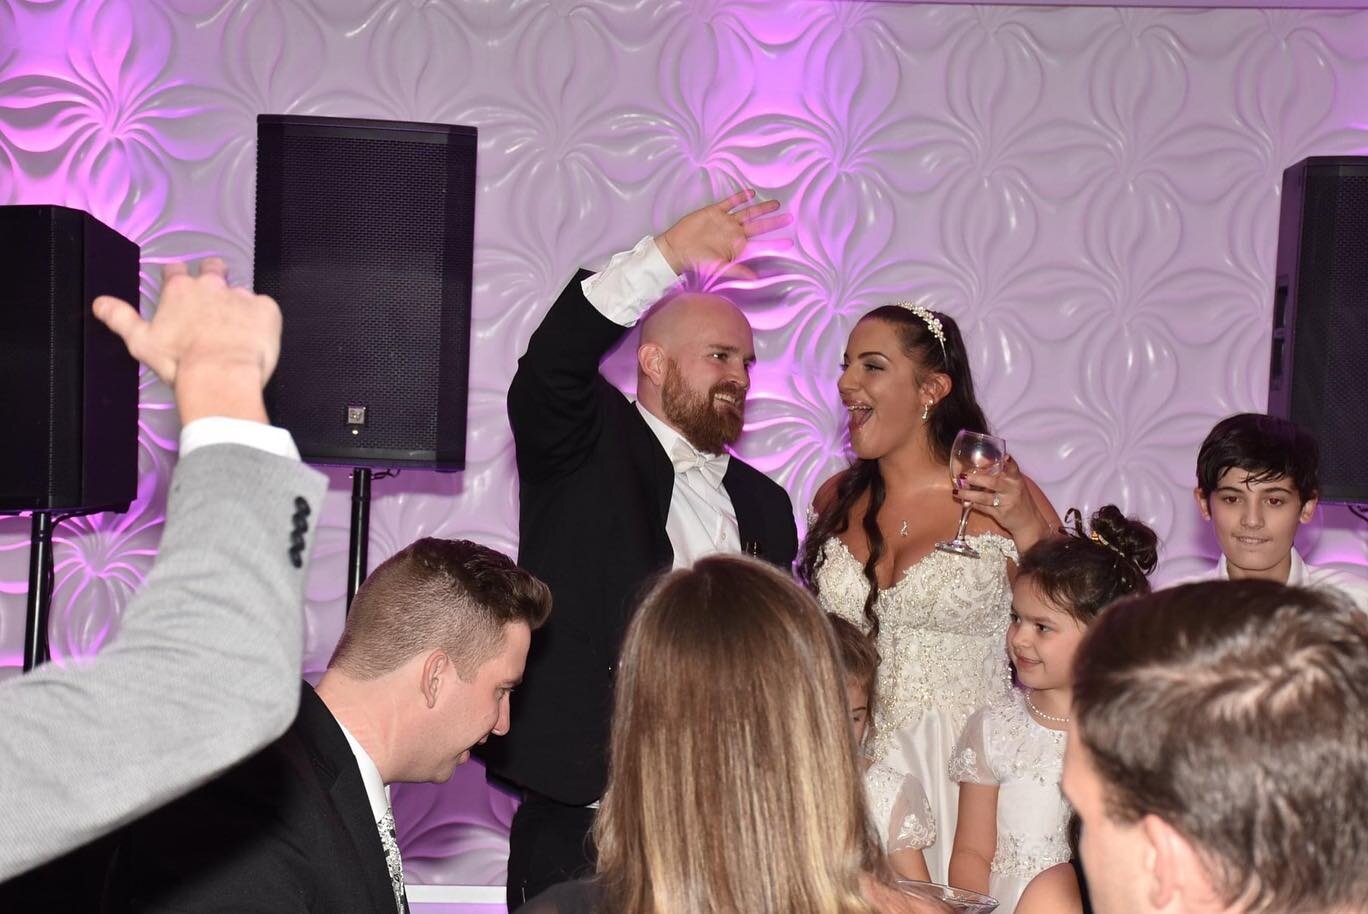 Jonathan &amp; Alyssa enjoyed every moment of their magical night this winter at the Fox Hollow. Everyone hit the dance floor, even the littlest dancer! We love looking back and reliving these memories and hope they are looking forward to their first